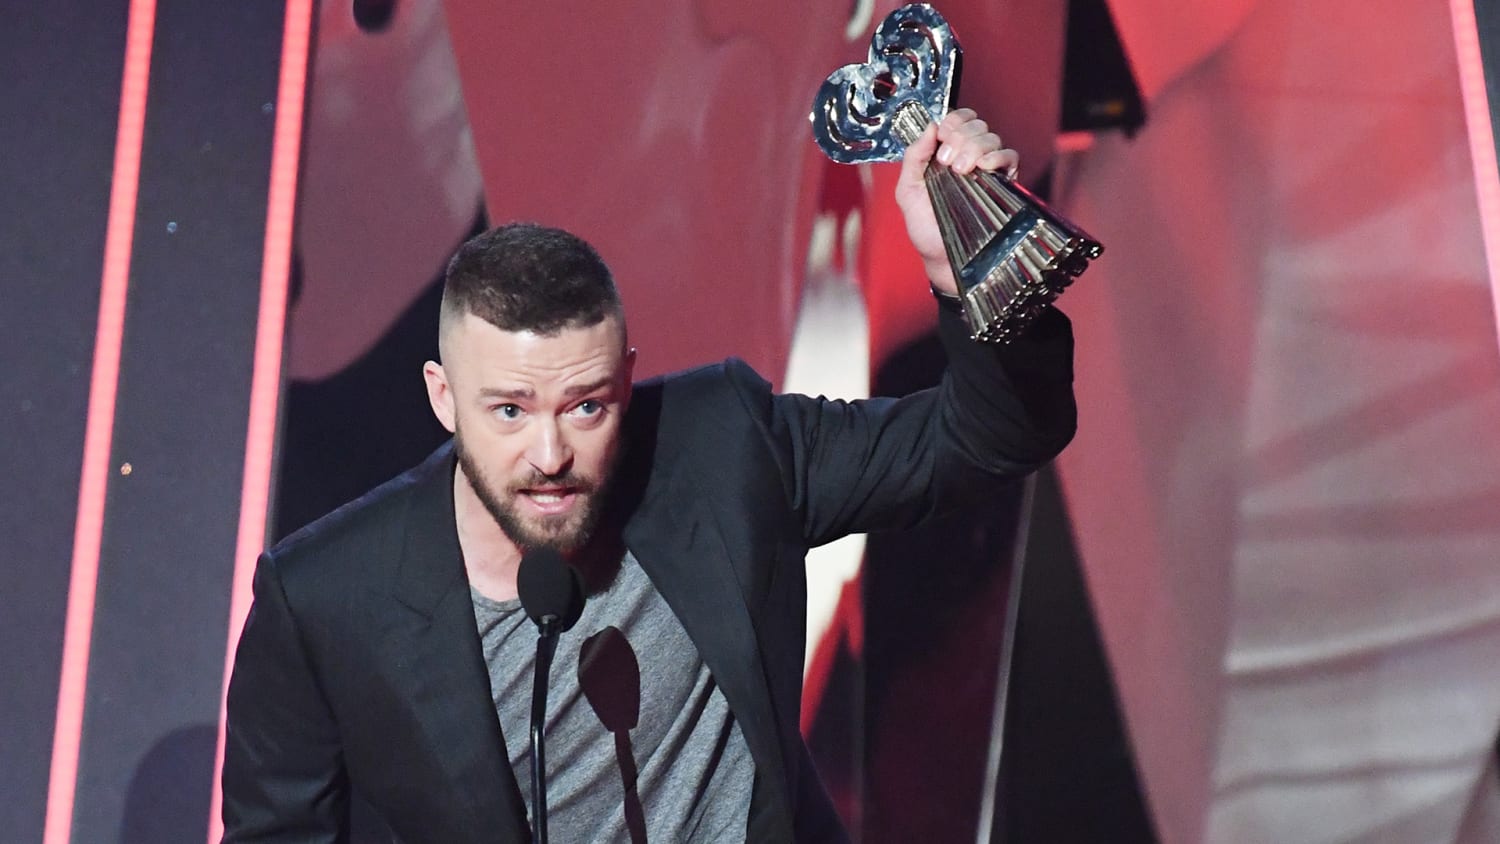 Justin Timberlake to young fans at iHeartRadio Awards: 'Being different  means you make the difference